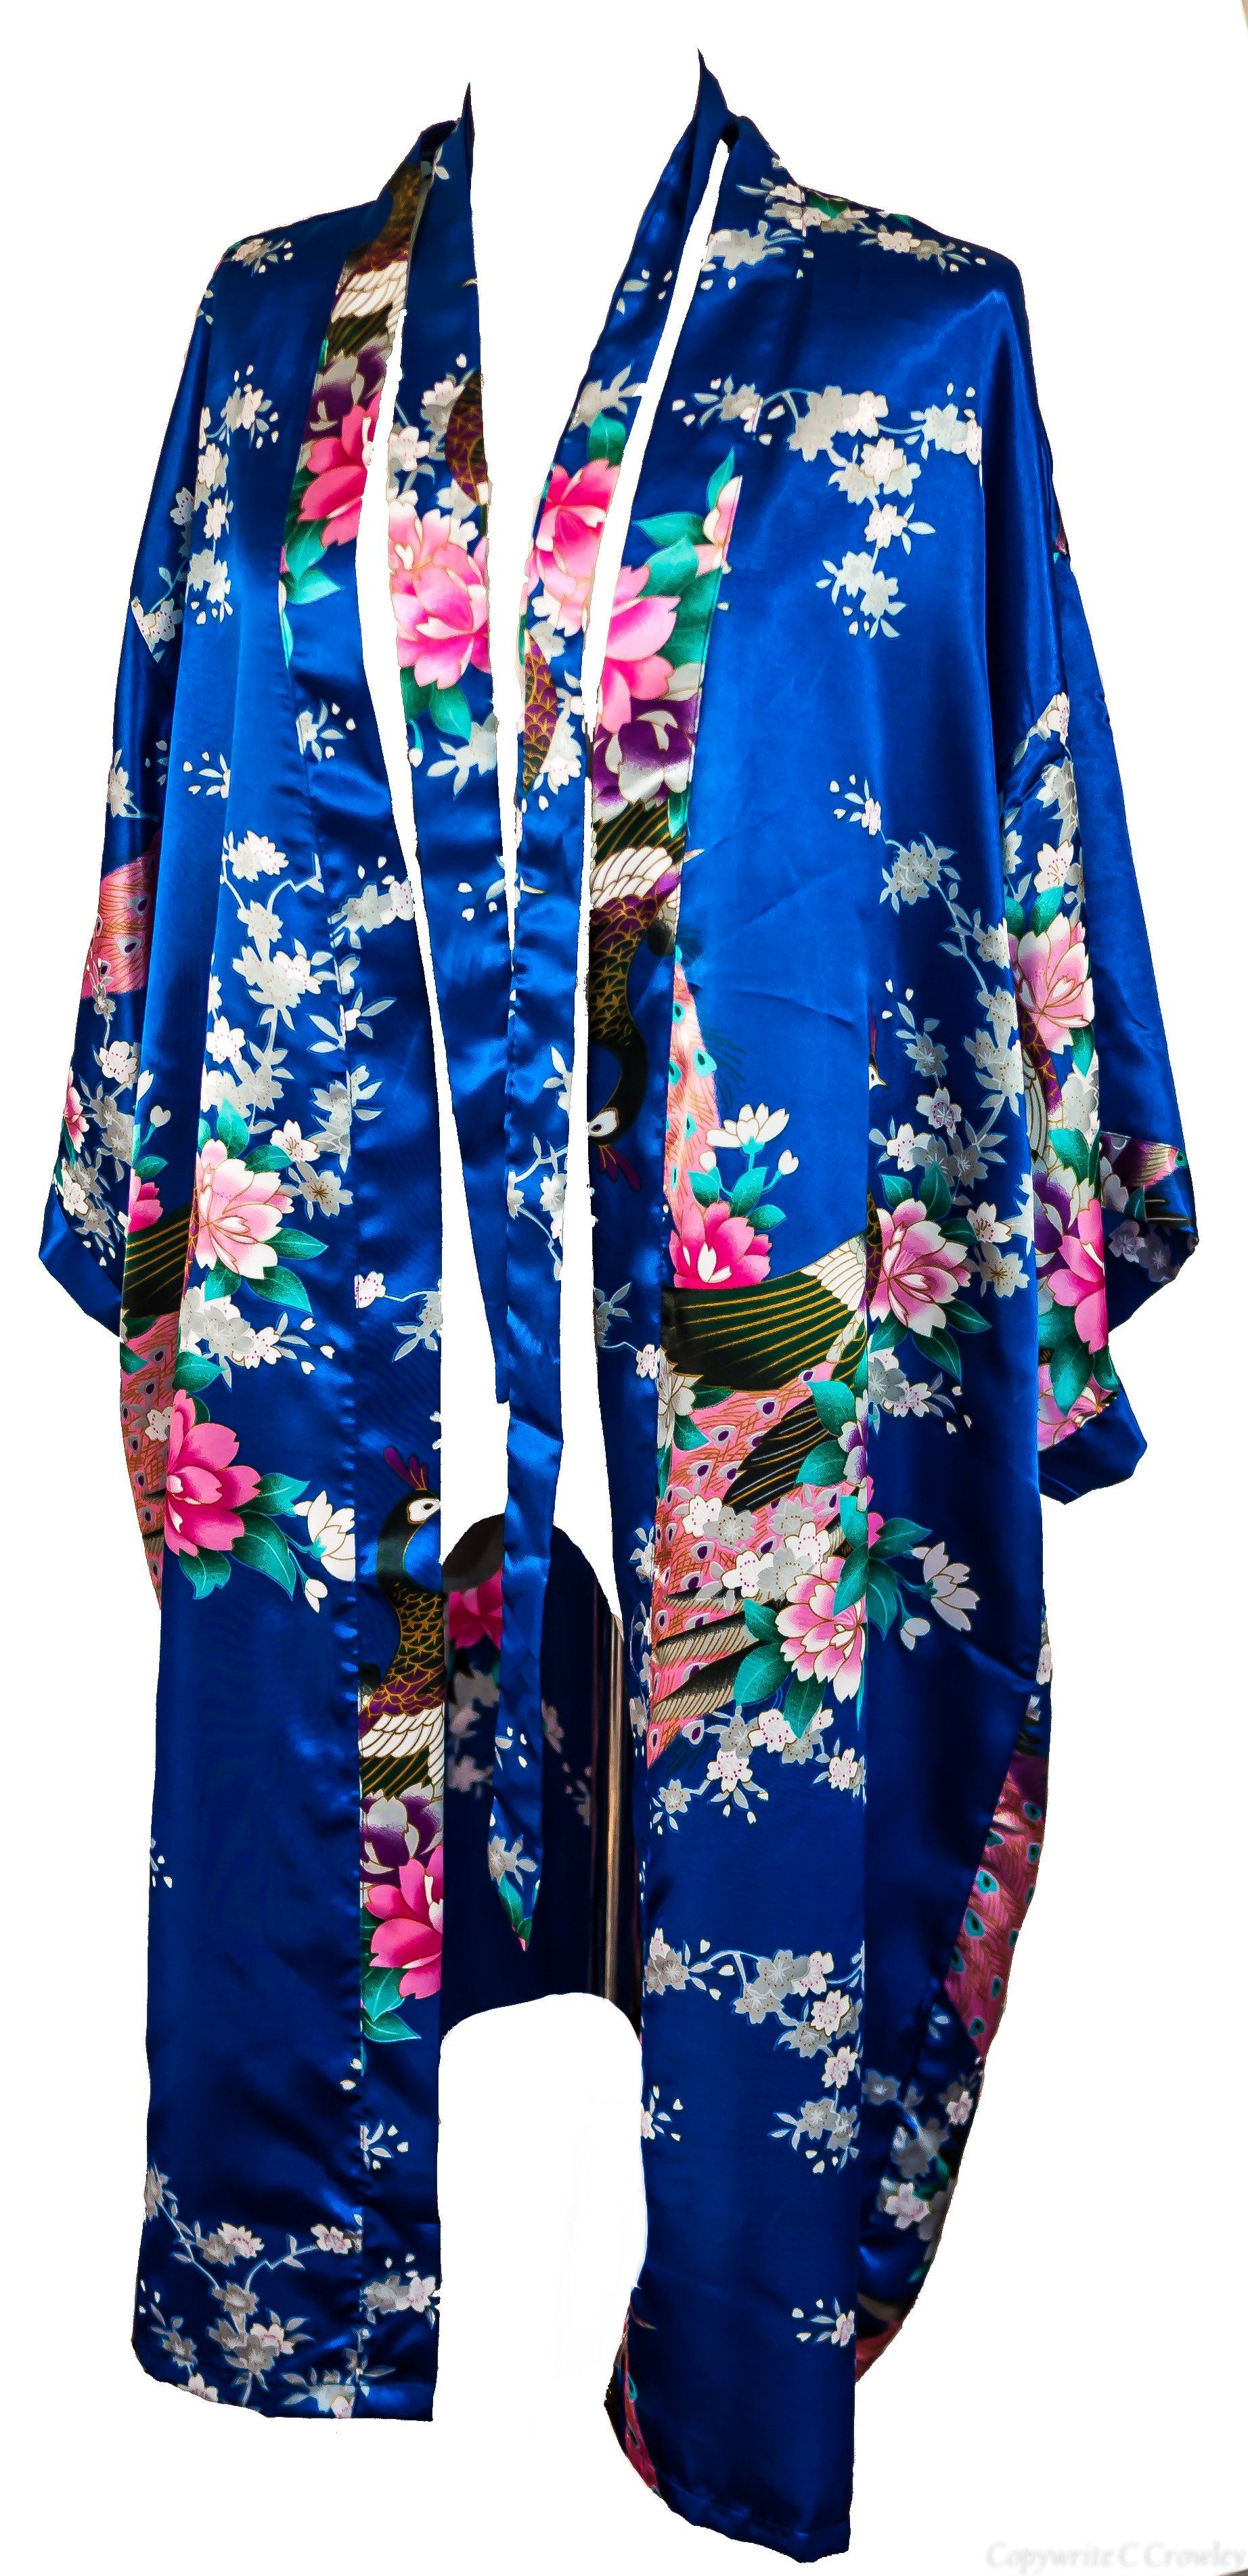 Kimono Robe Peacock - Lightweight Women's Robe | Indulge in Affordable Luxury - CCCollections